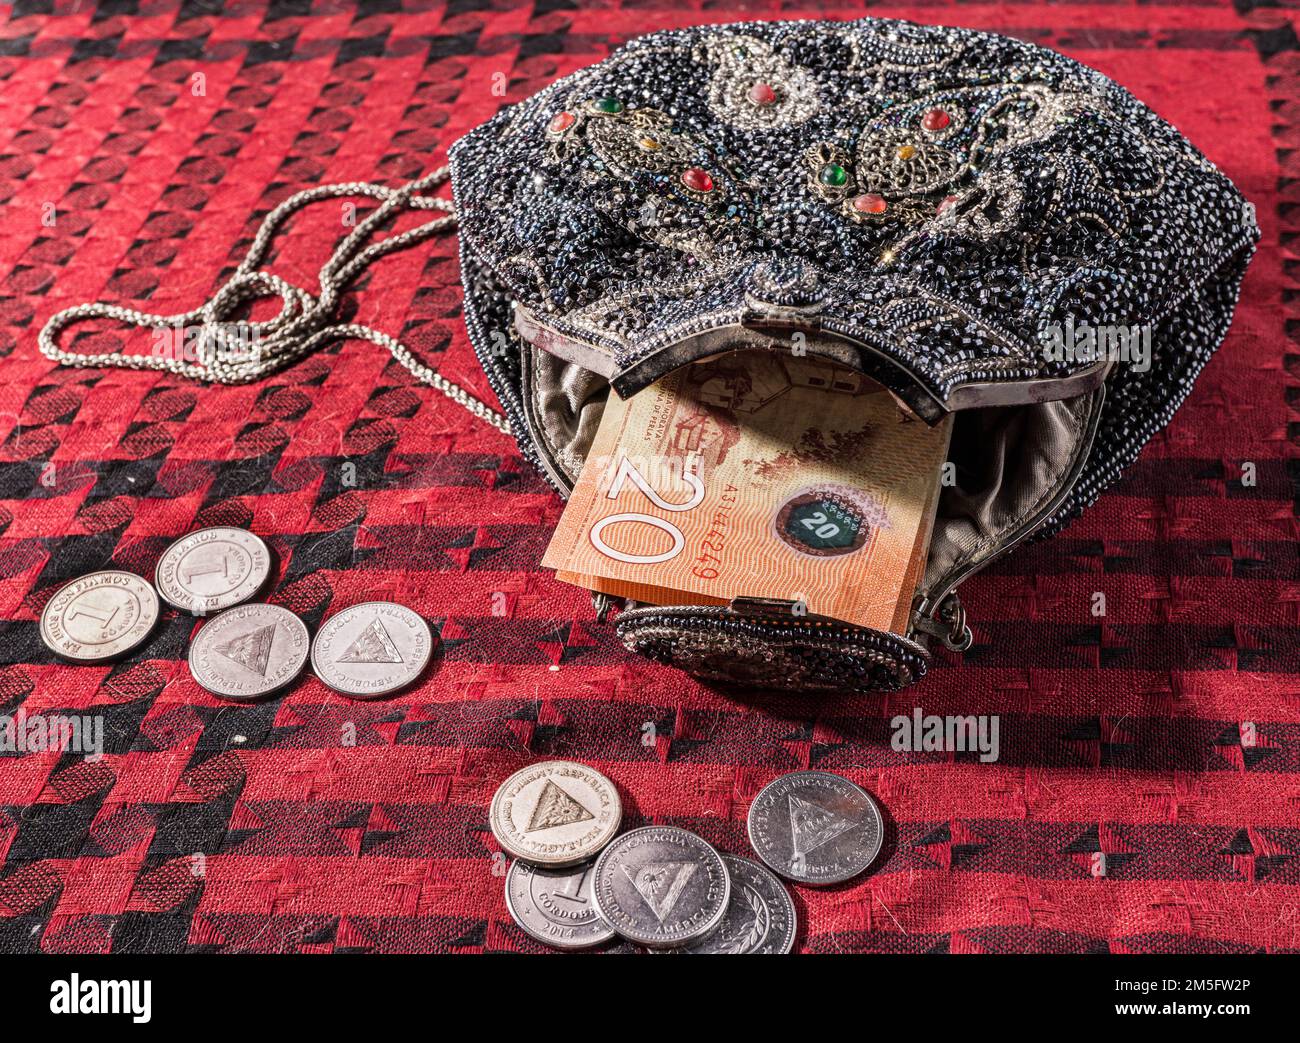 Beaded antique purse swallows Nicaraguan bills while surrounded by coins. Stock Photo